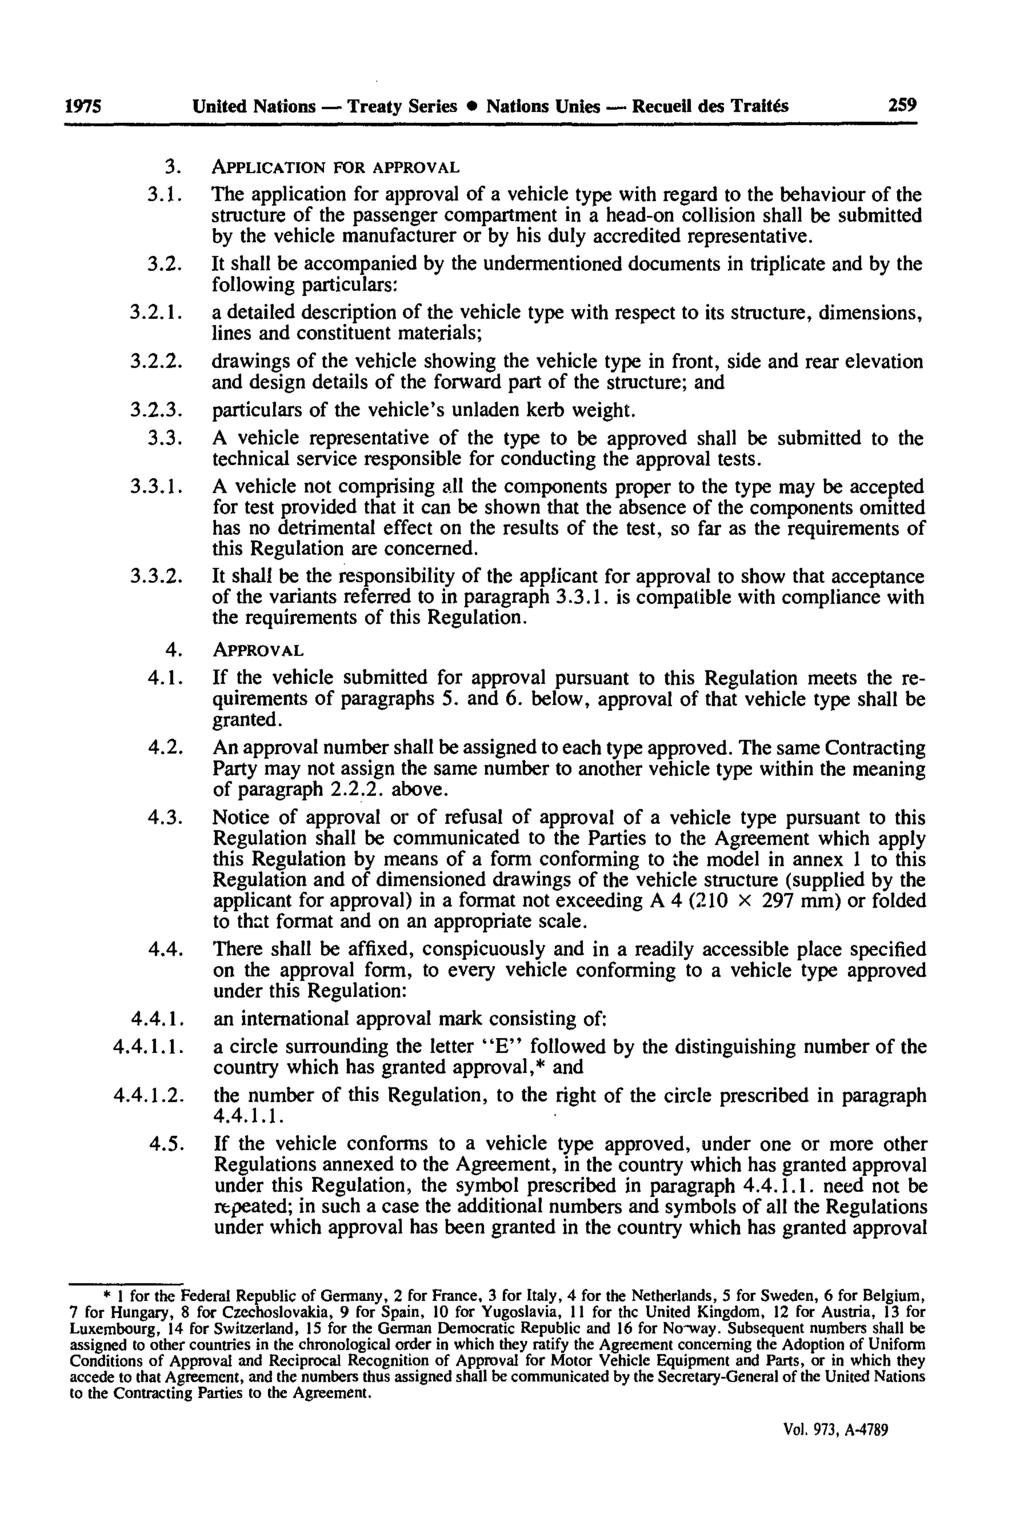 1975 United Nations Treaty Series Nations Unies Recueil des Traités 259 3. APPLICATION FOR APPROVAL 3.1. The application for approval of a vehicle type with regard to the behaviour of the structure